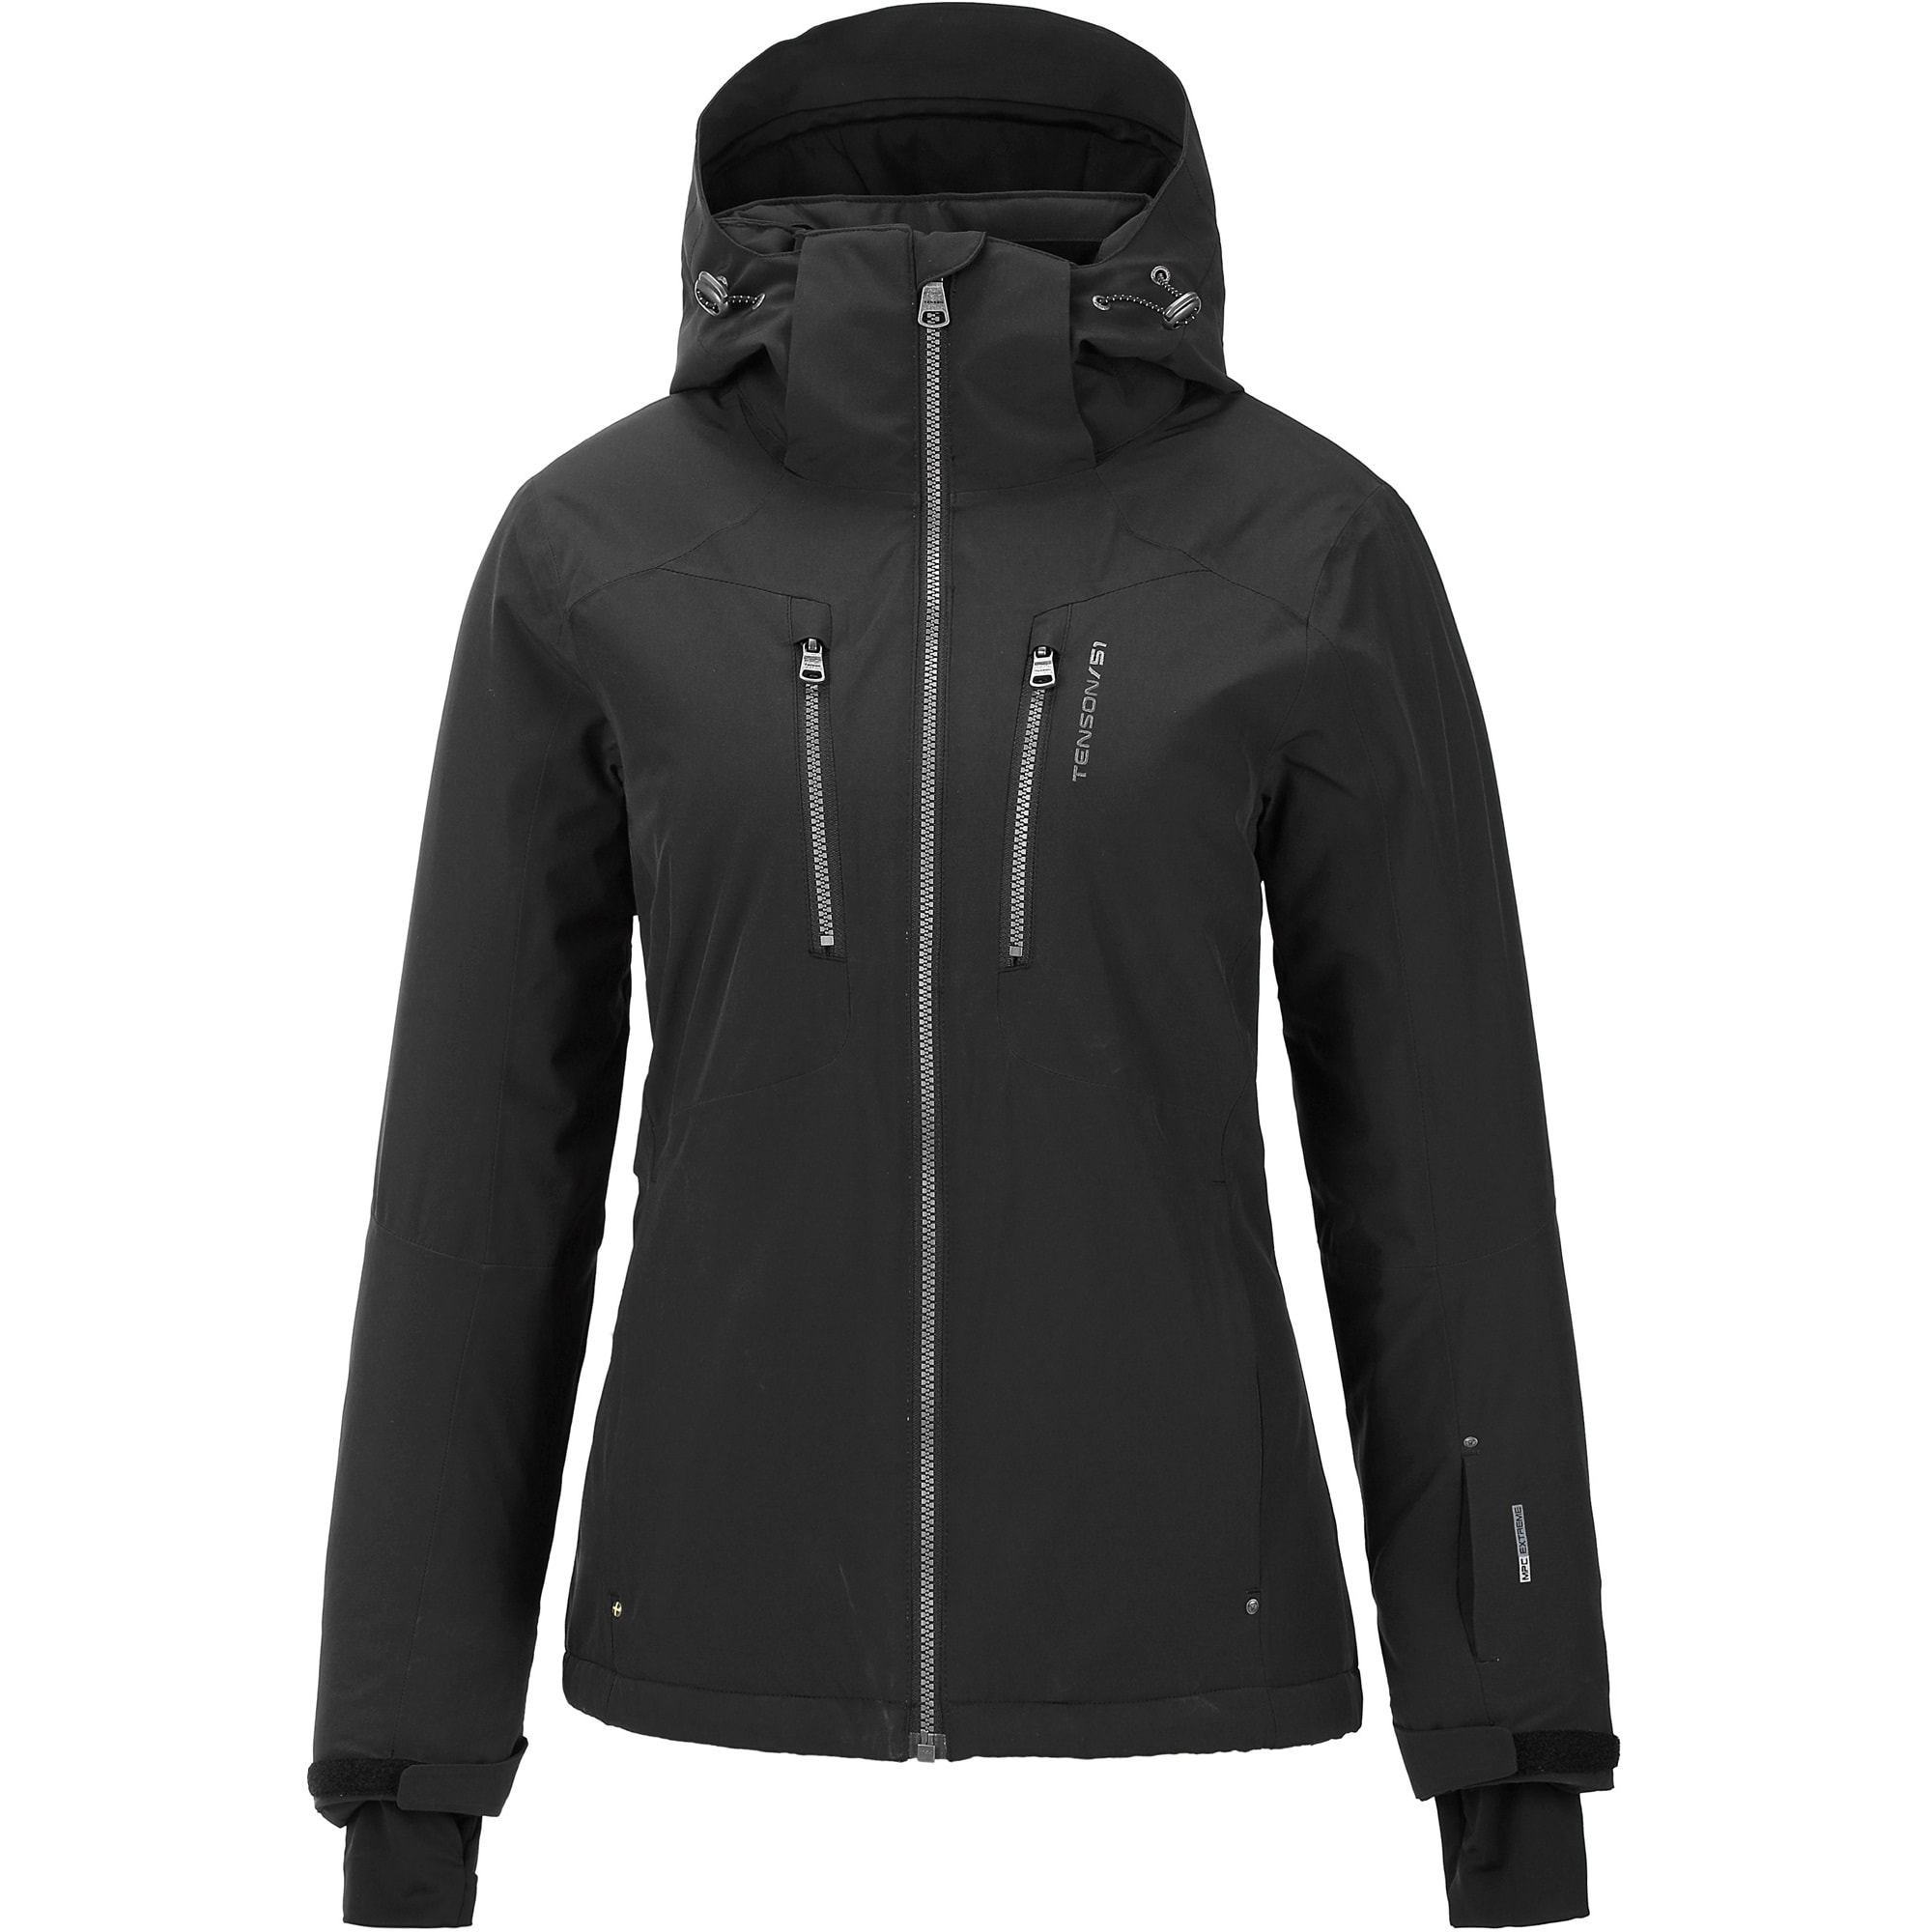 Drama Bank Conflict Buy Tenson Yoko Women's Ski Jacket from Outnorth